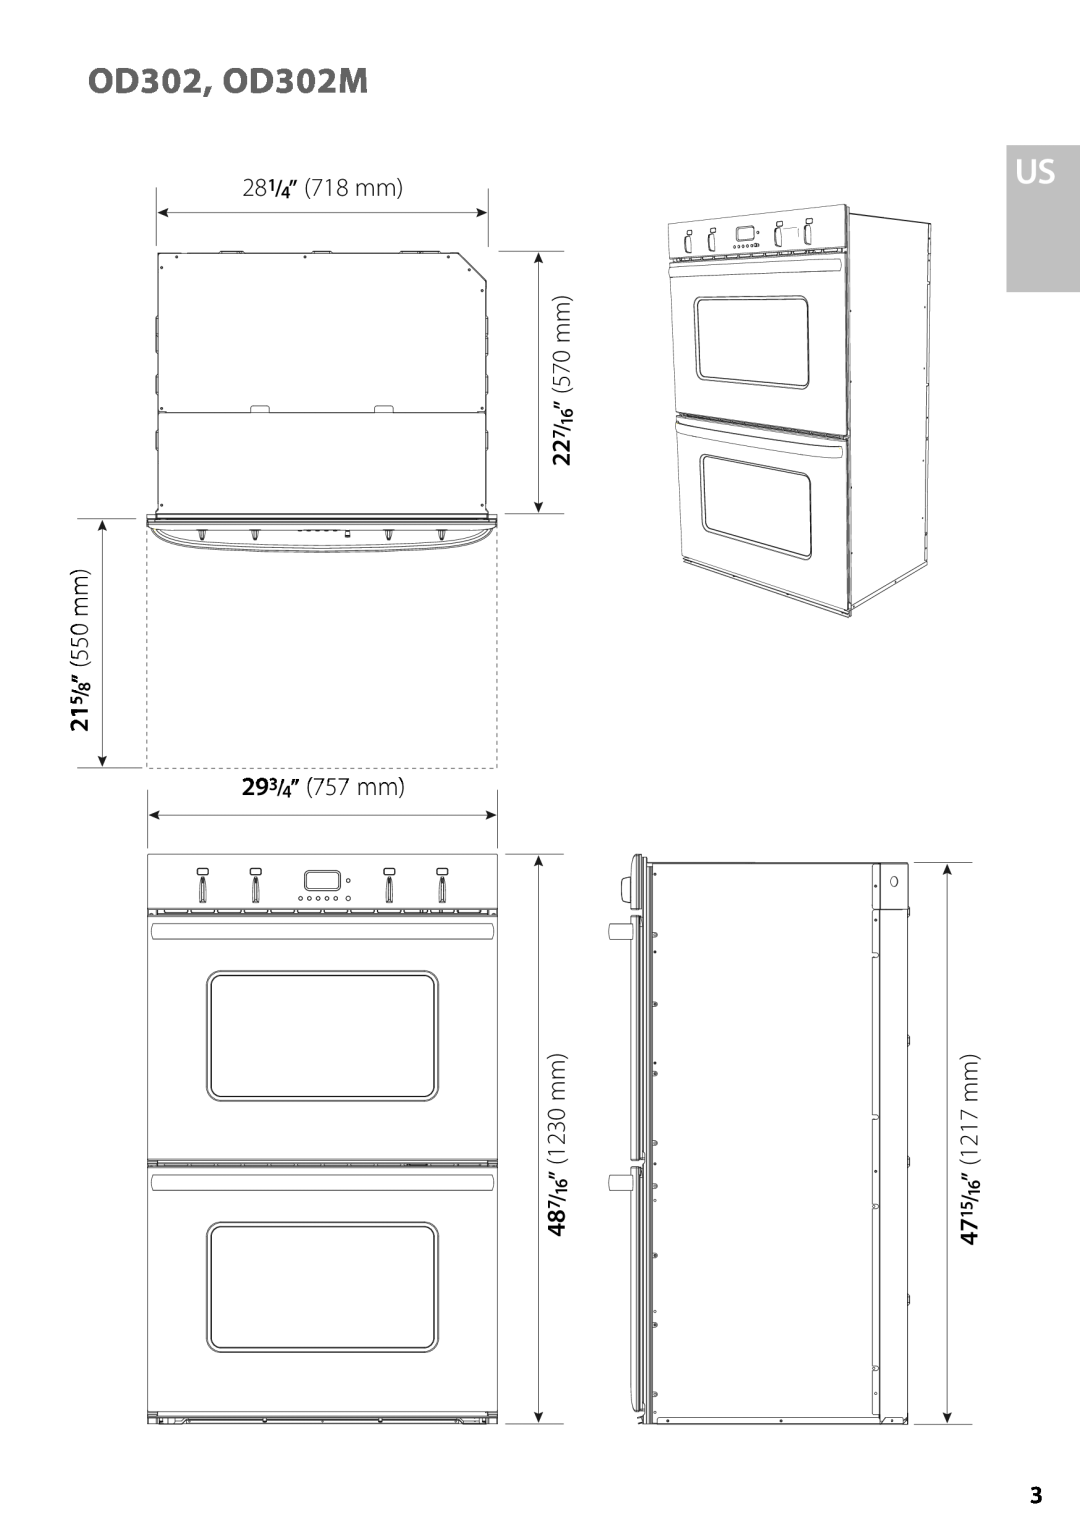 Fisher & Paykel OS302M installation instructions OD302, OD302M, 487/16” 1230 mm, 4715/16” 1217 mm 